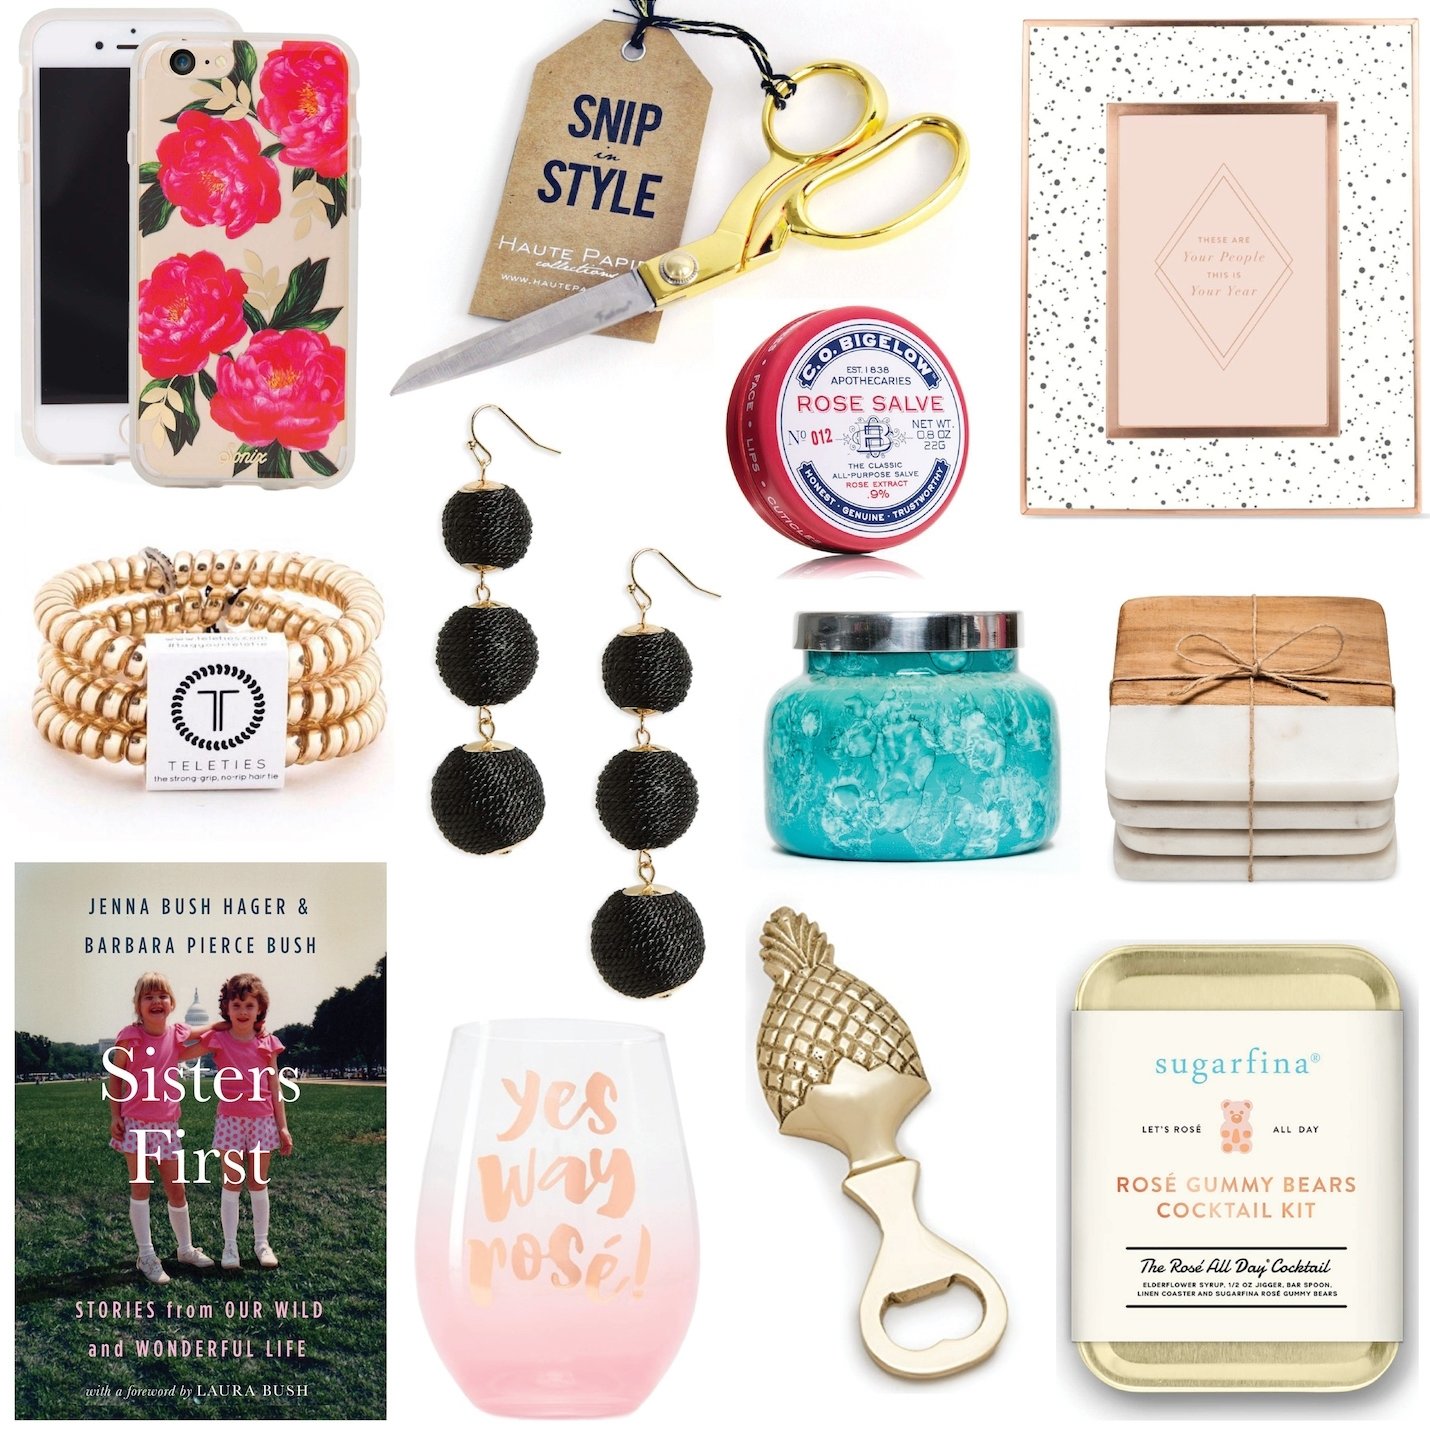 10 Unique Gift Ideas Under 25 Dollars gift ideas for women under 25 a touch of teal 2022